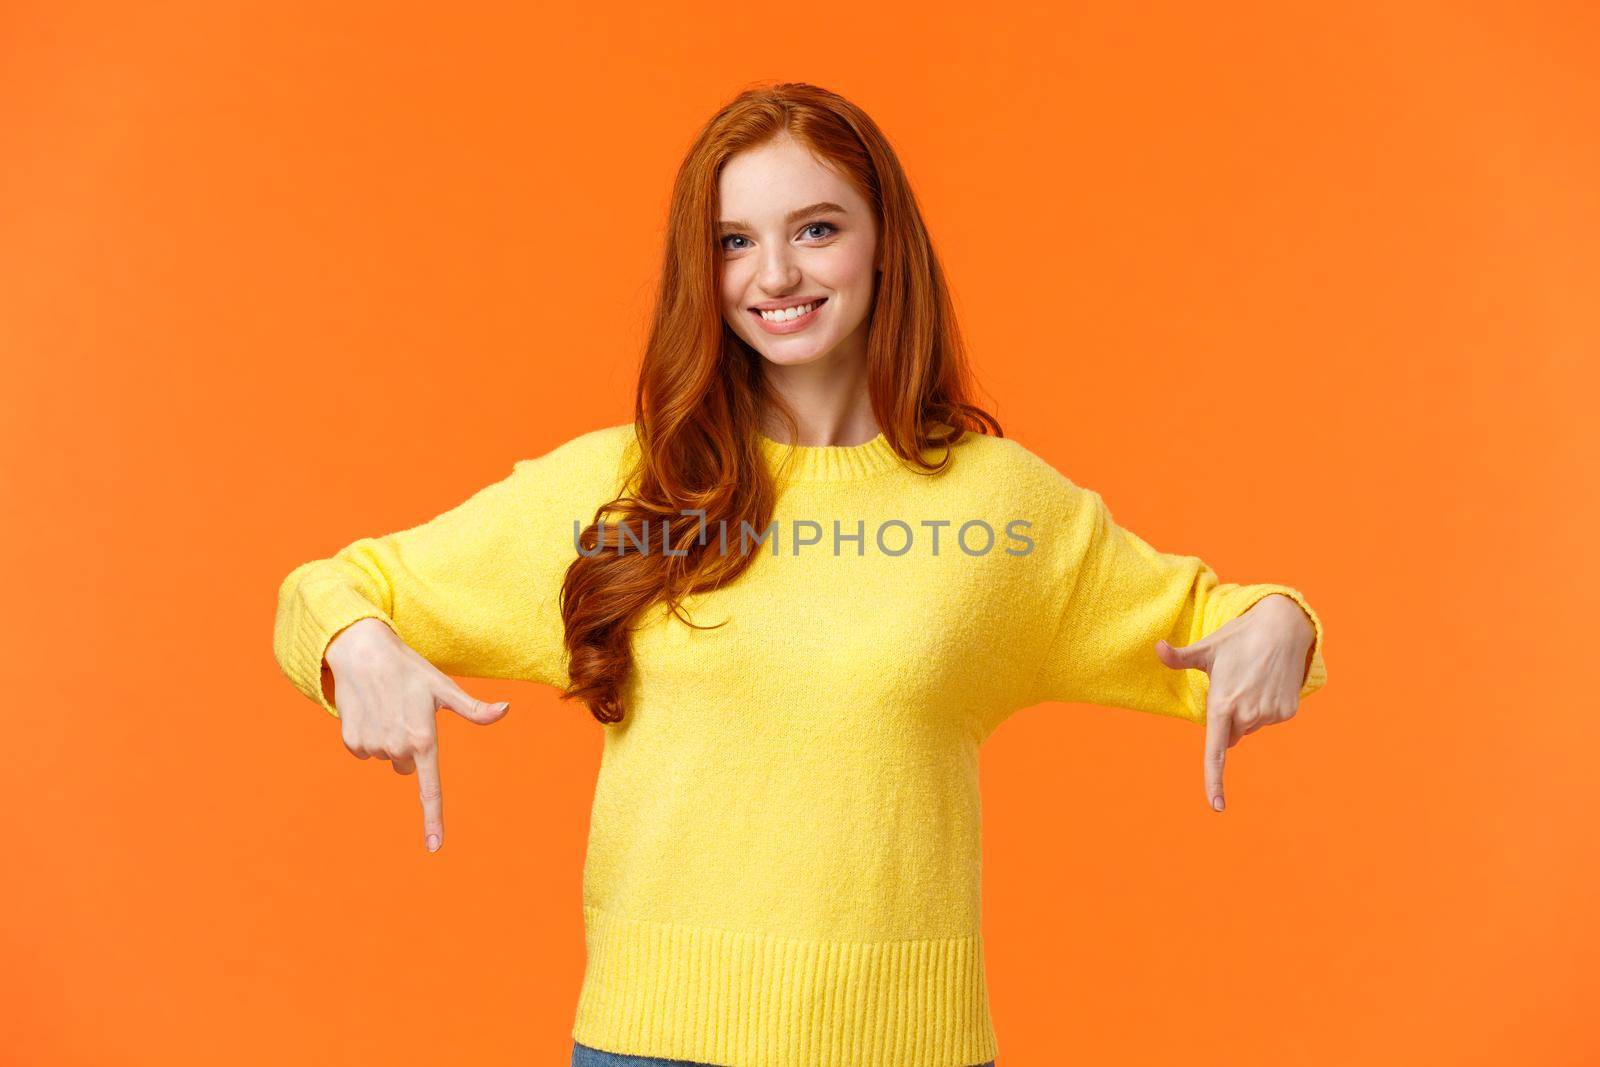 You need see this, check it out. Cheerful gorgeous redhead girl in yellow sweater, smiling and pointing down, recommend product, advertising shopping holidays sales, orange background.